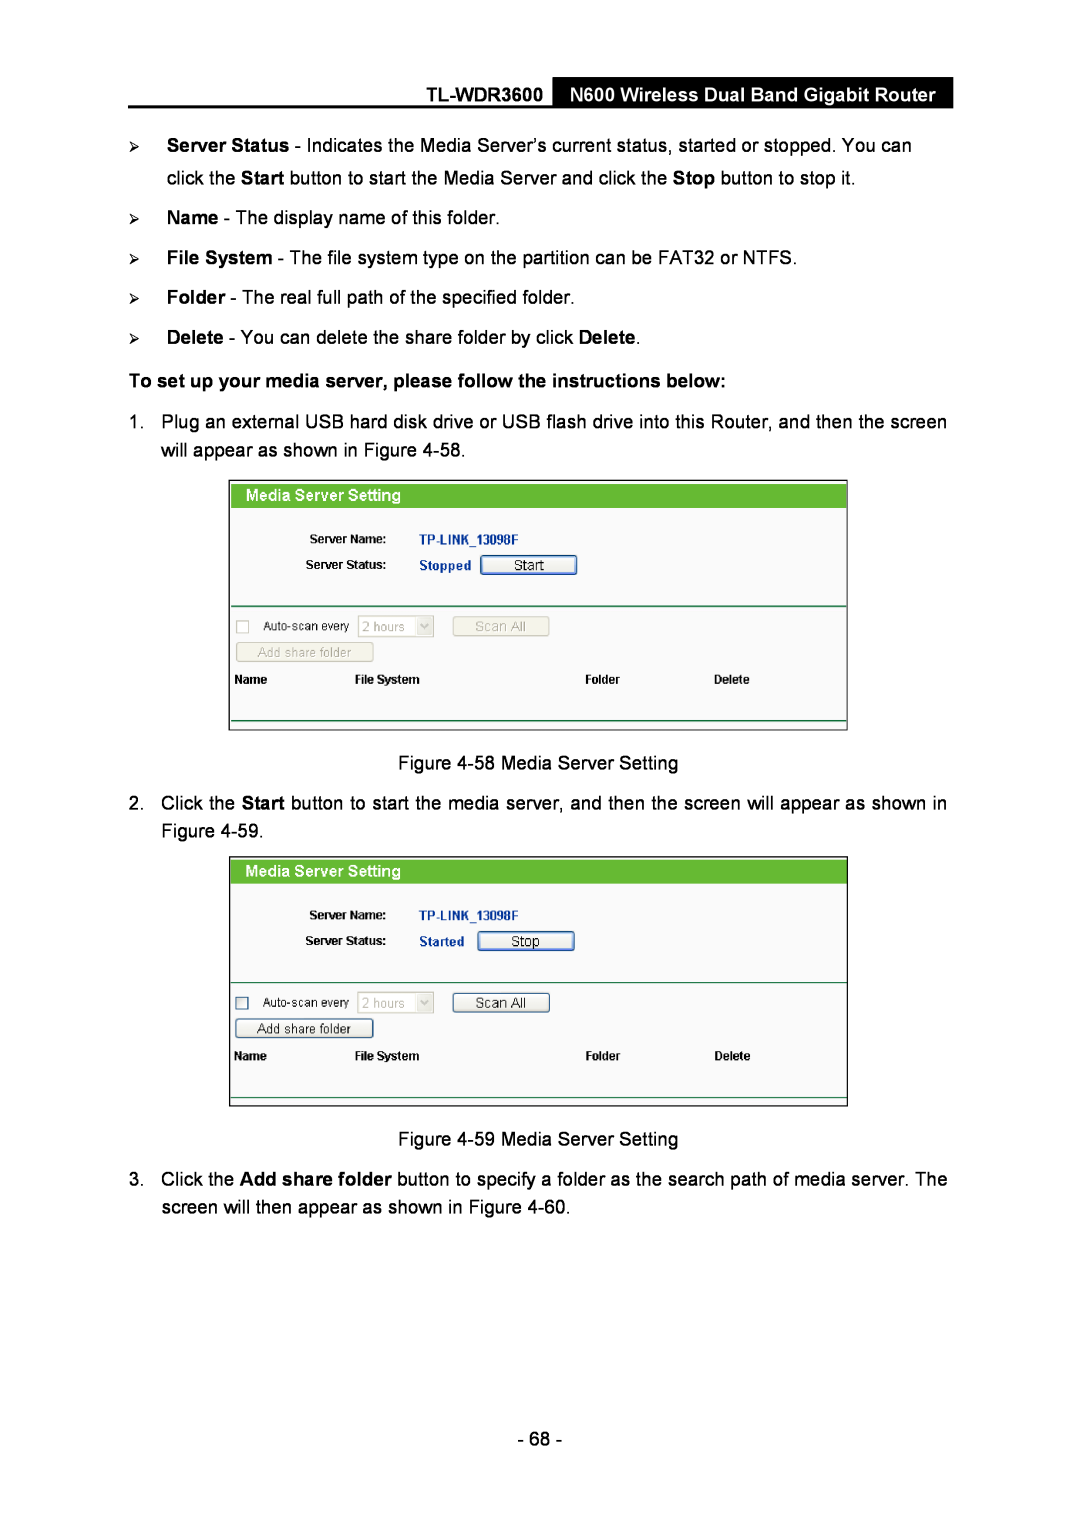 TP-Link TL-WDR3600 manual To set up your media server, please follow the instructions below 